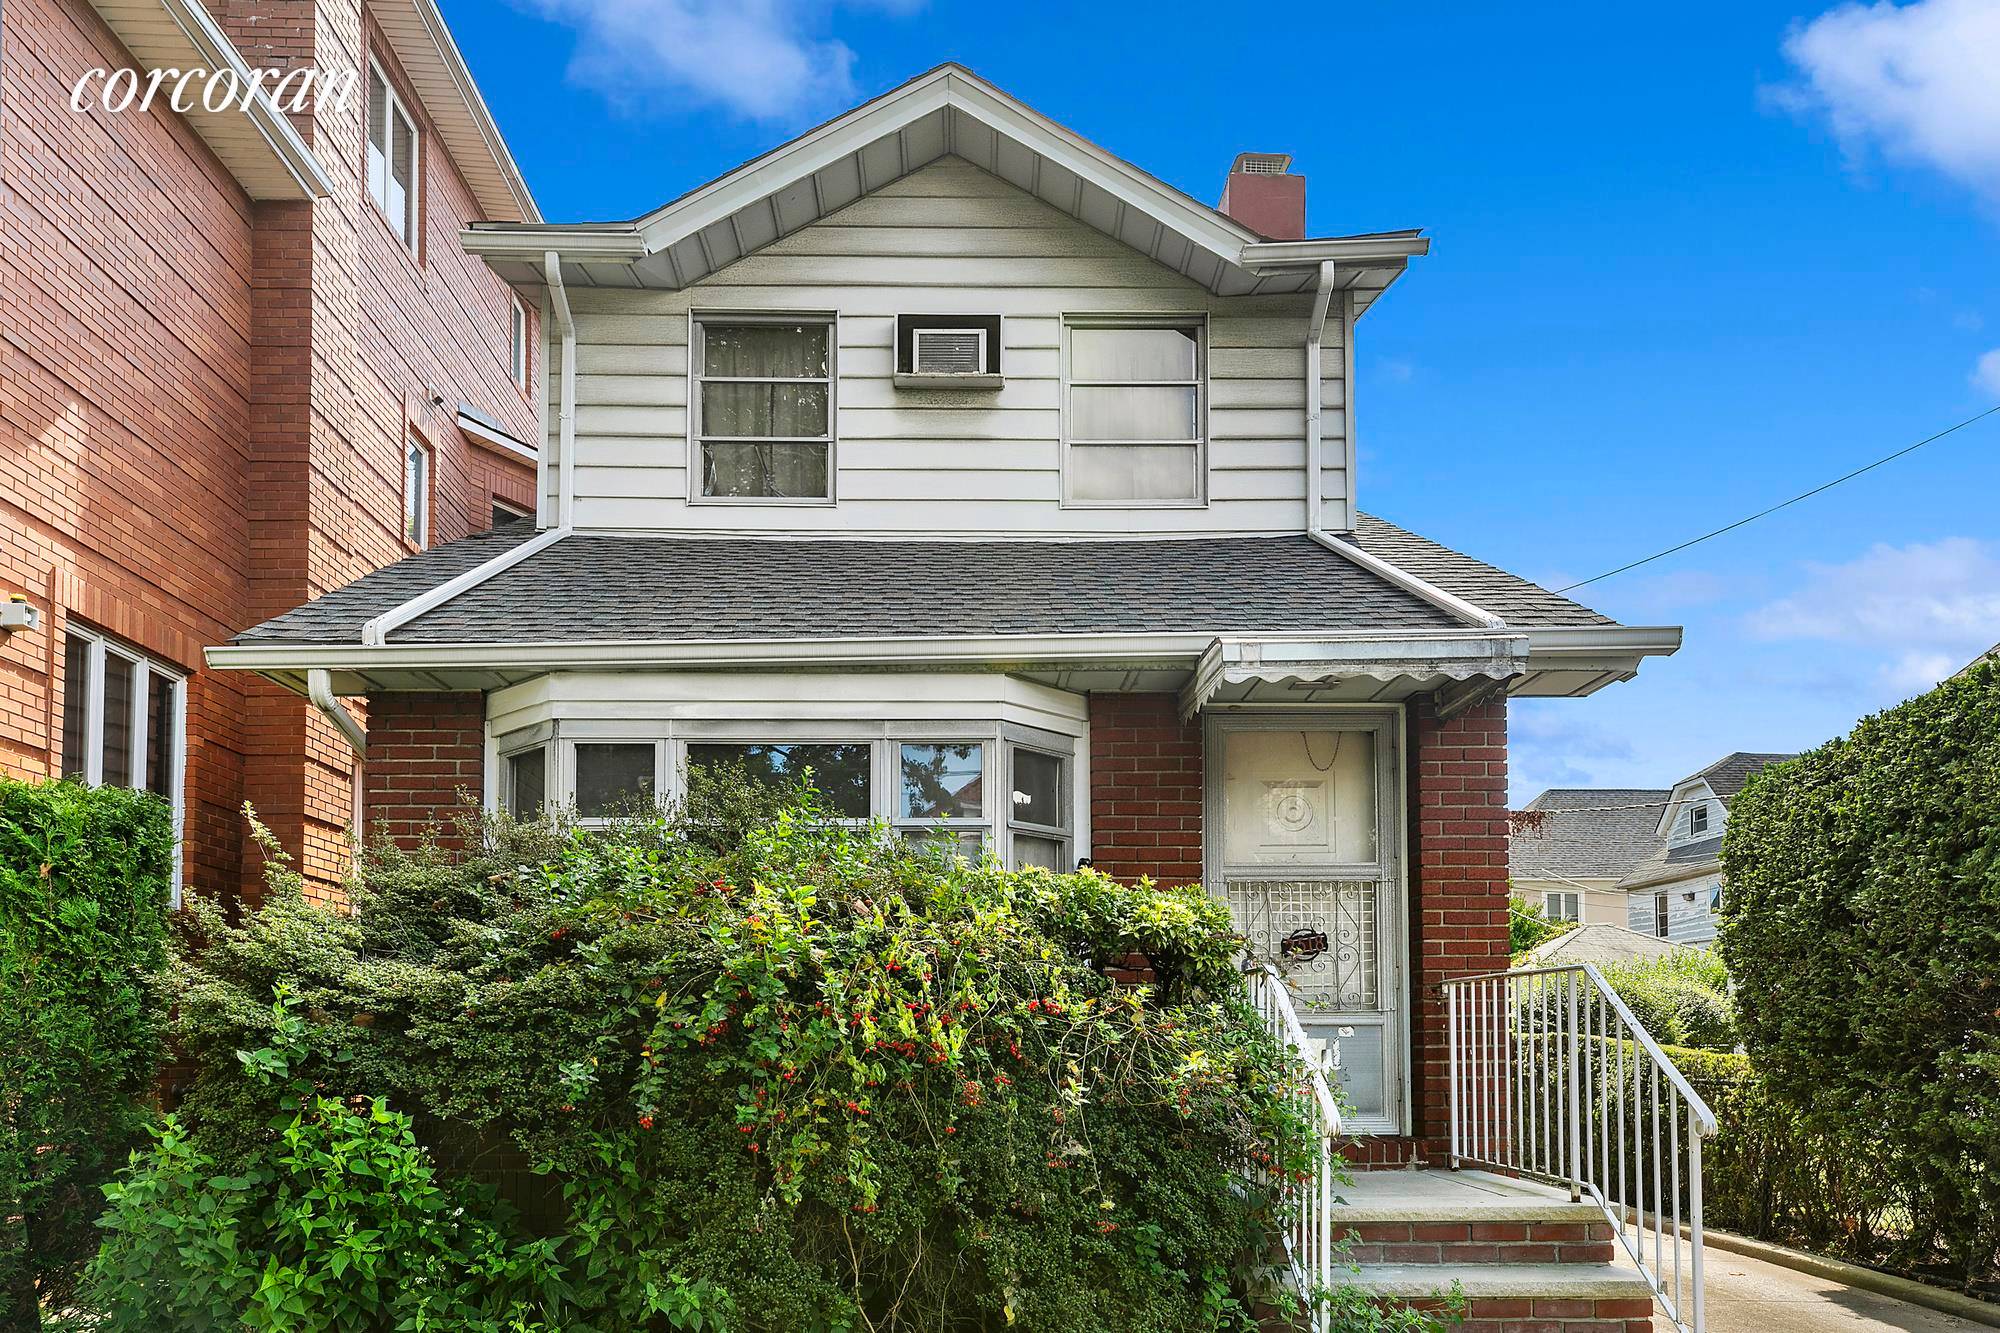 NEW Single Family Detached Home in Prime Midwood is on the market for the first time in over 50 years !